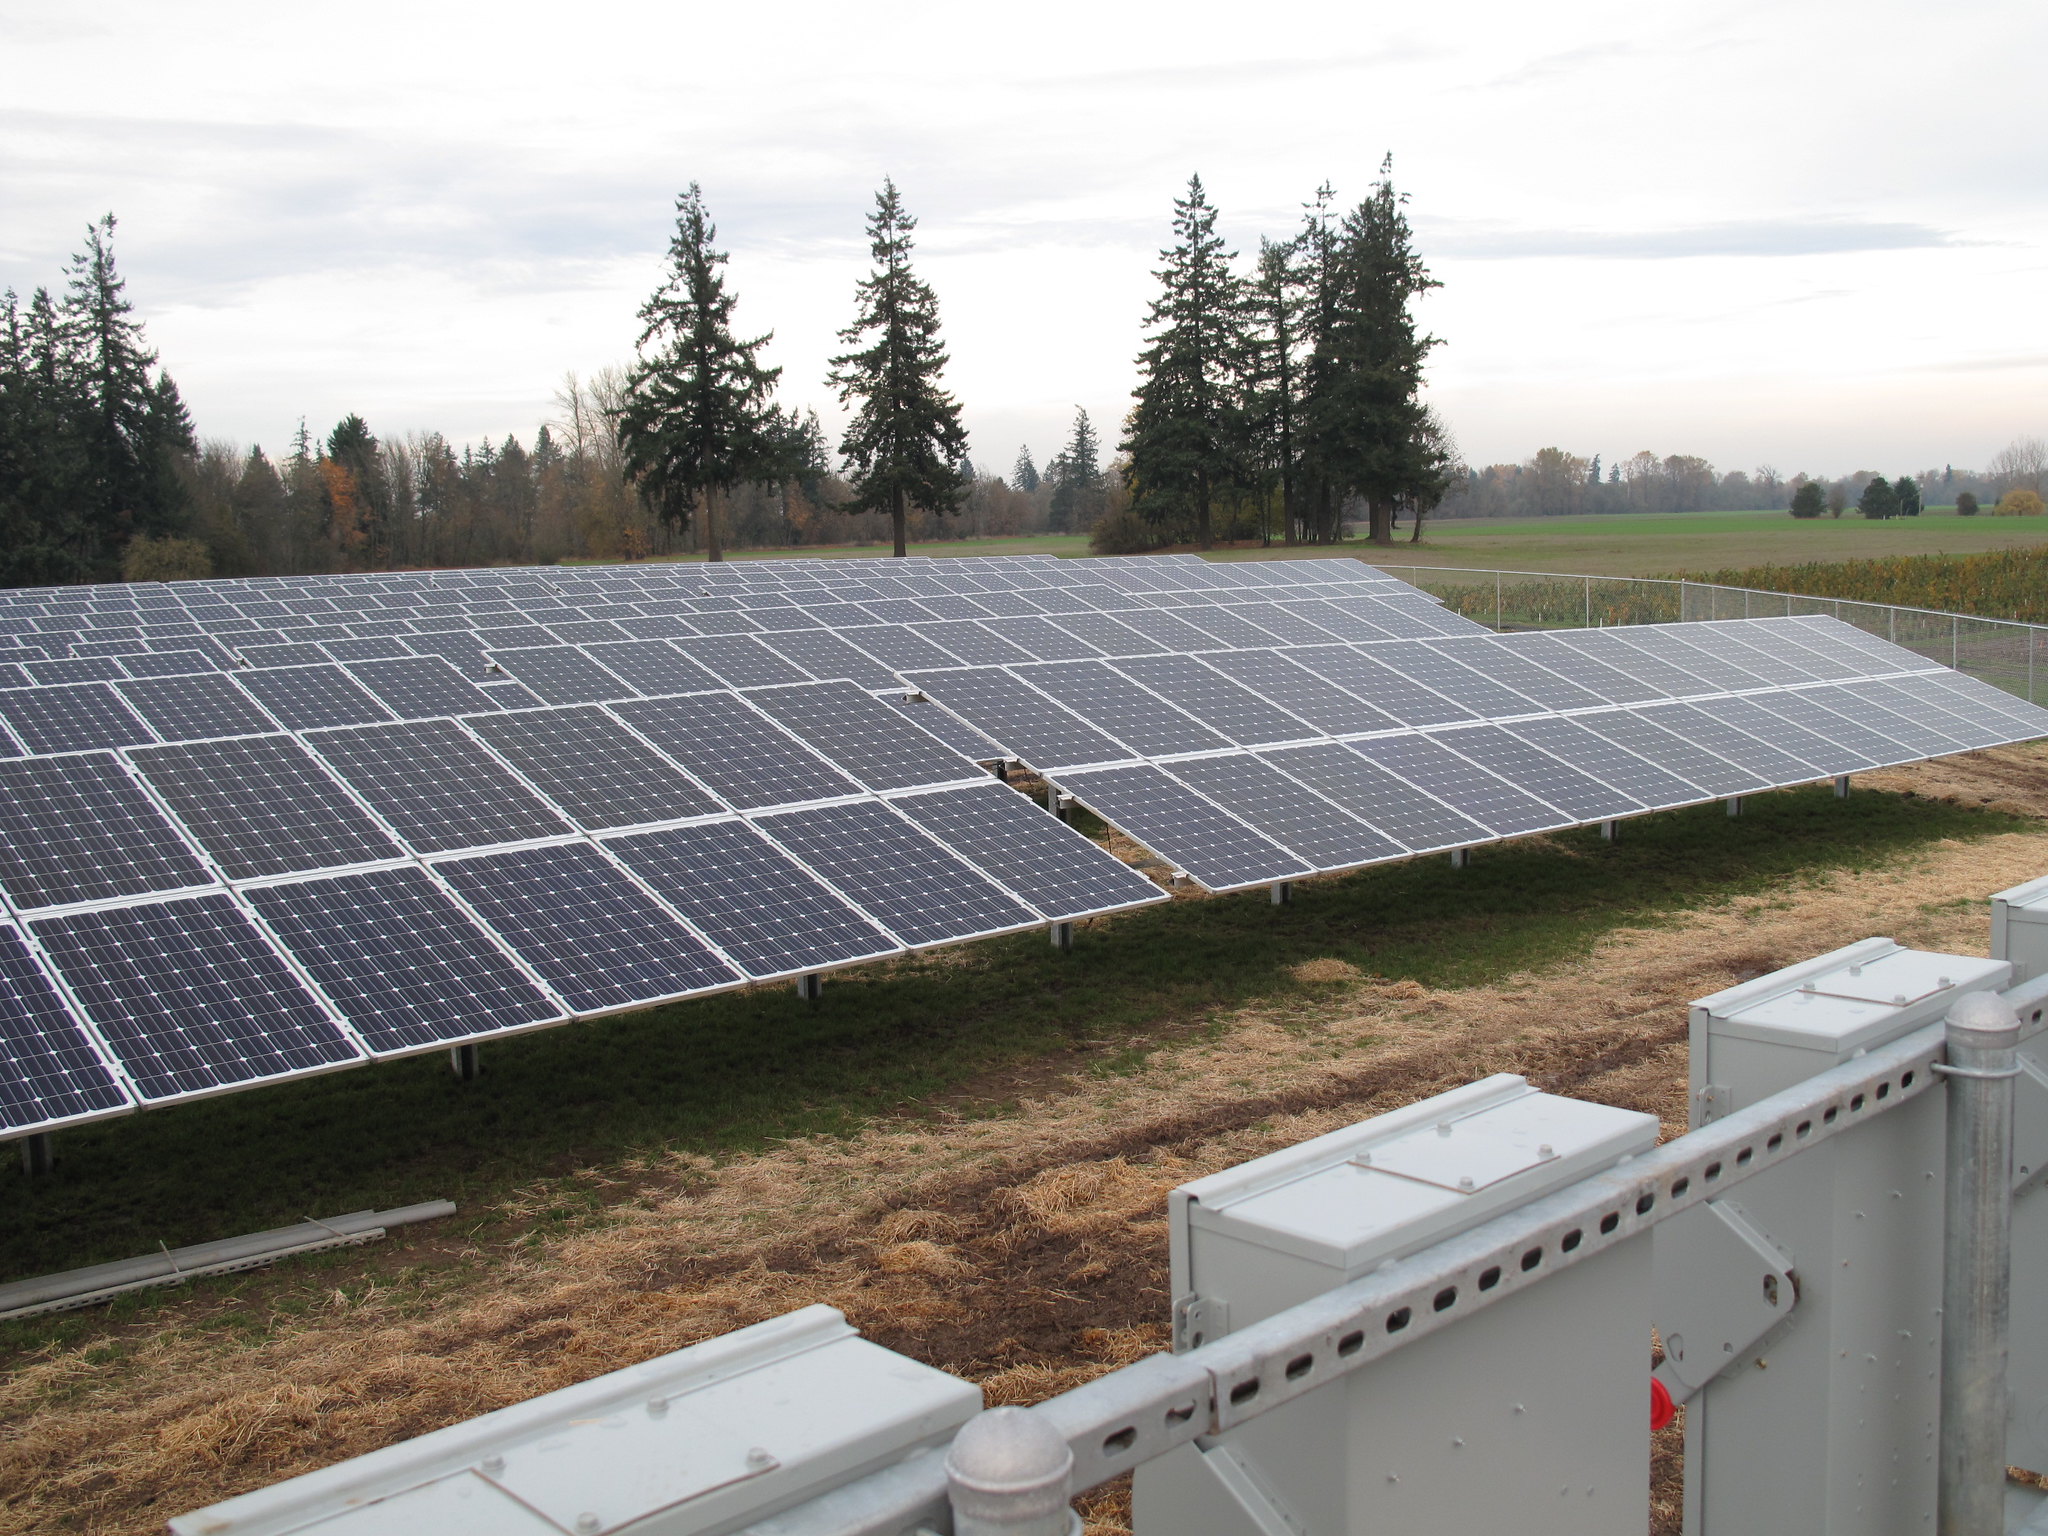 Oregon Nears Launch of a Solid Community Solar Program Institute for Local SelfReliance